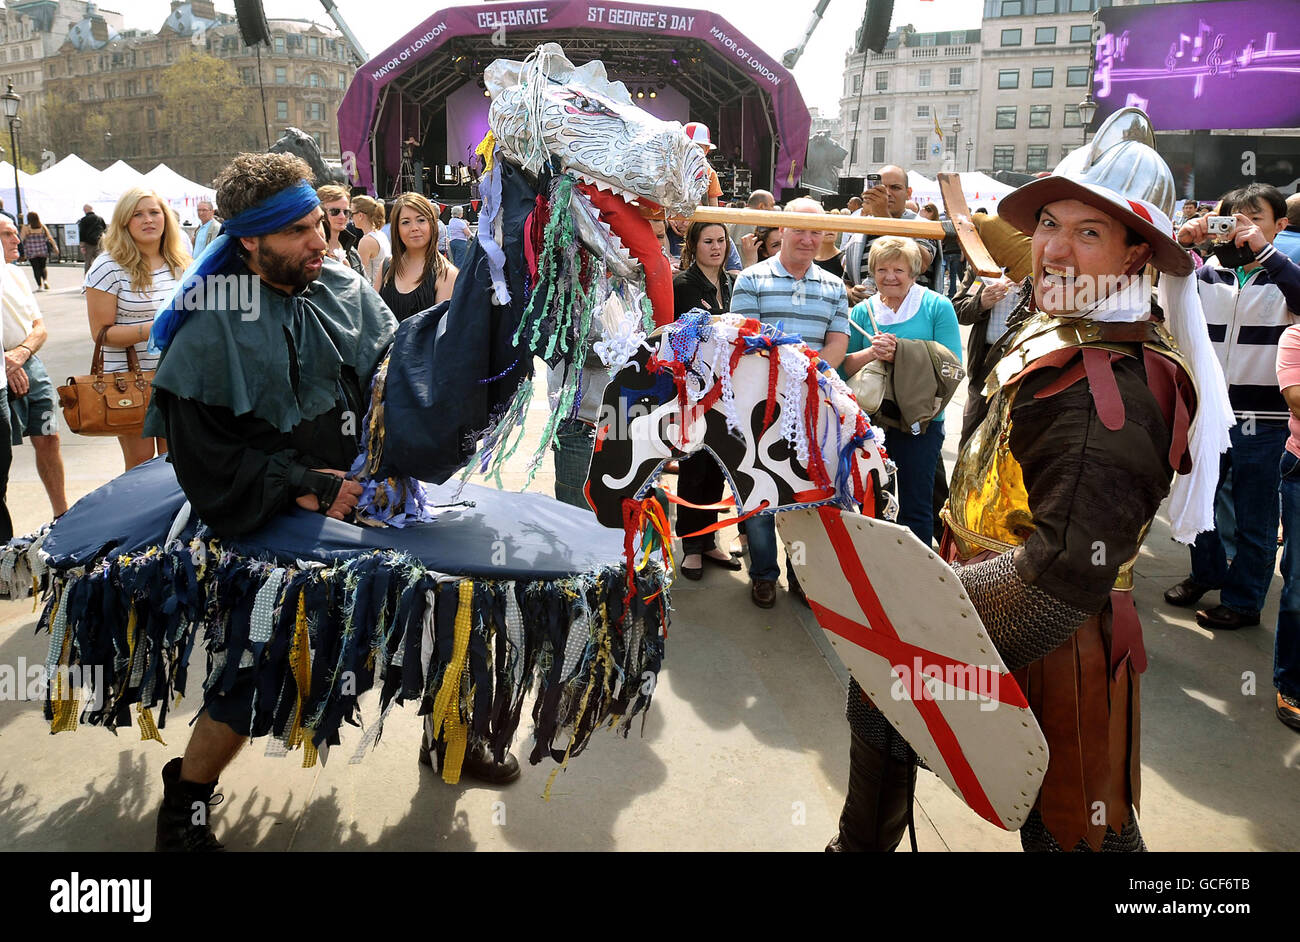 Customs and Traditions - St George's Day  - Trafalgar Square Stock Photo